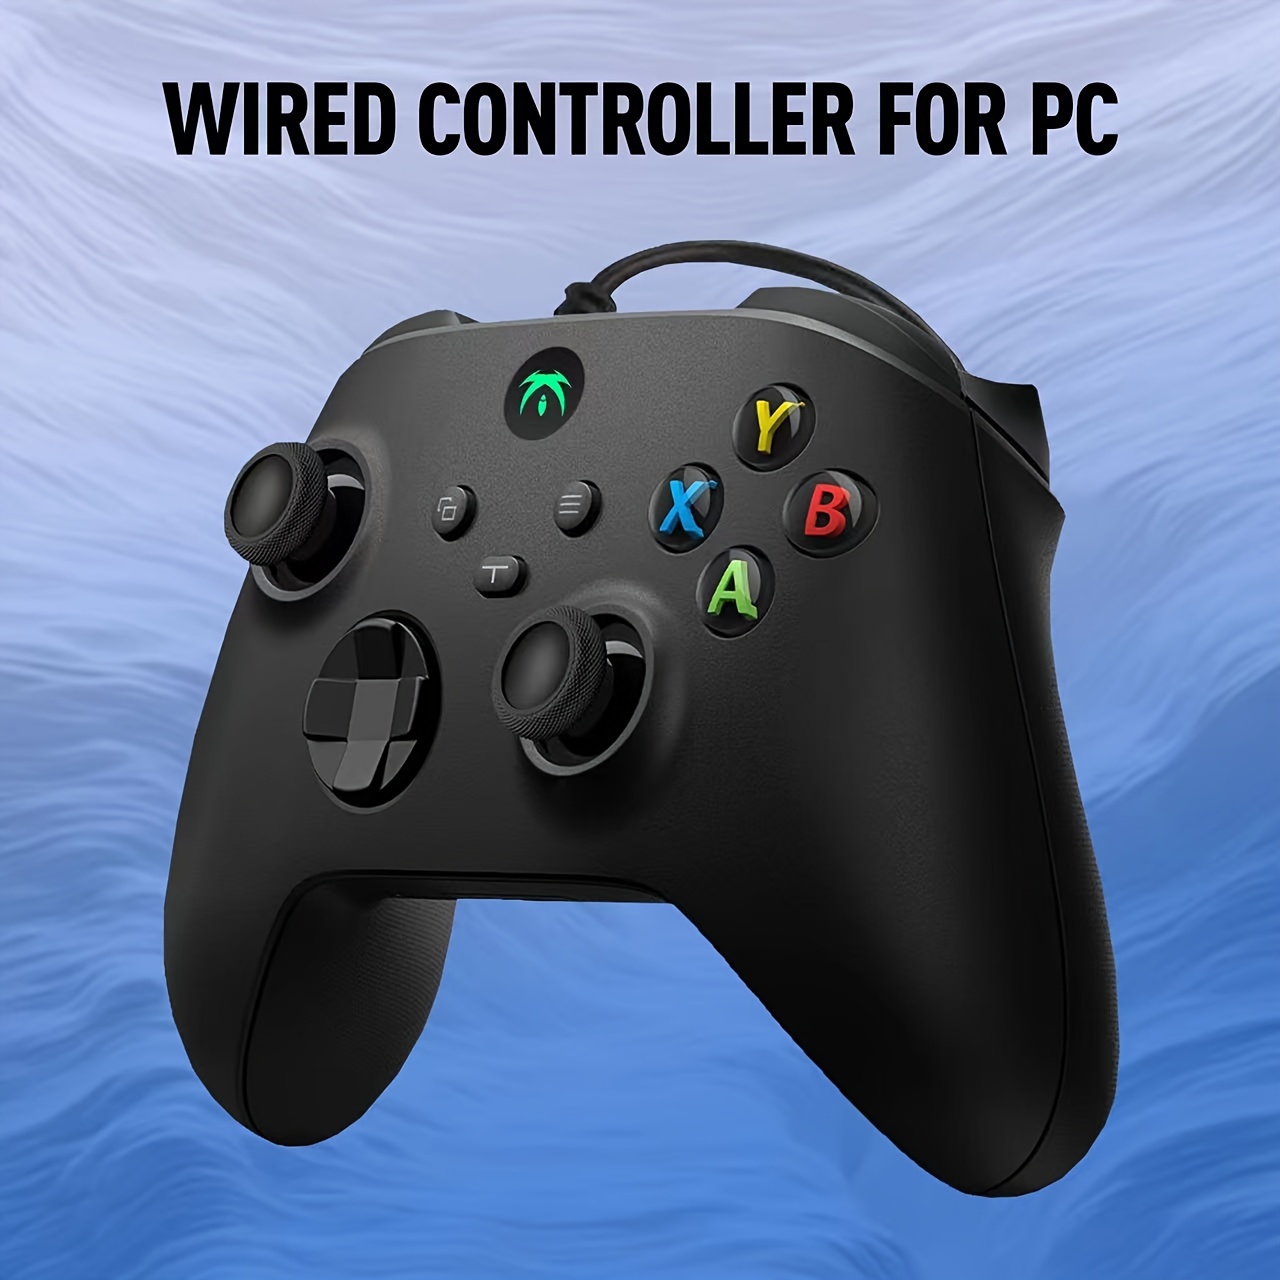 Wired USB PC Game Controller Gamepad For WinXP/Win7/8/10 Joypad